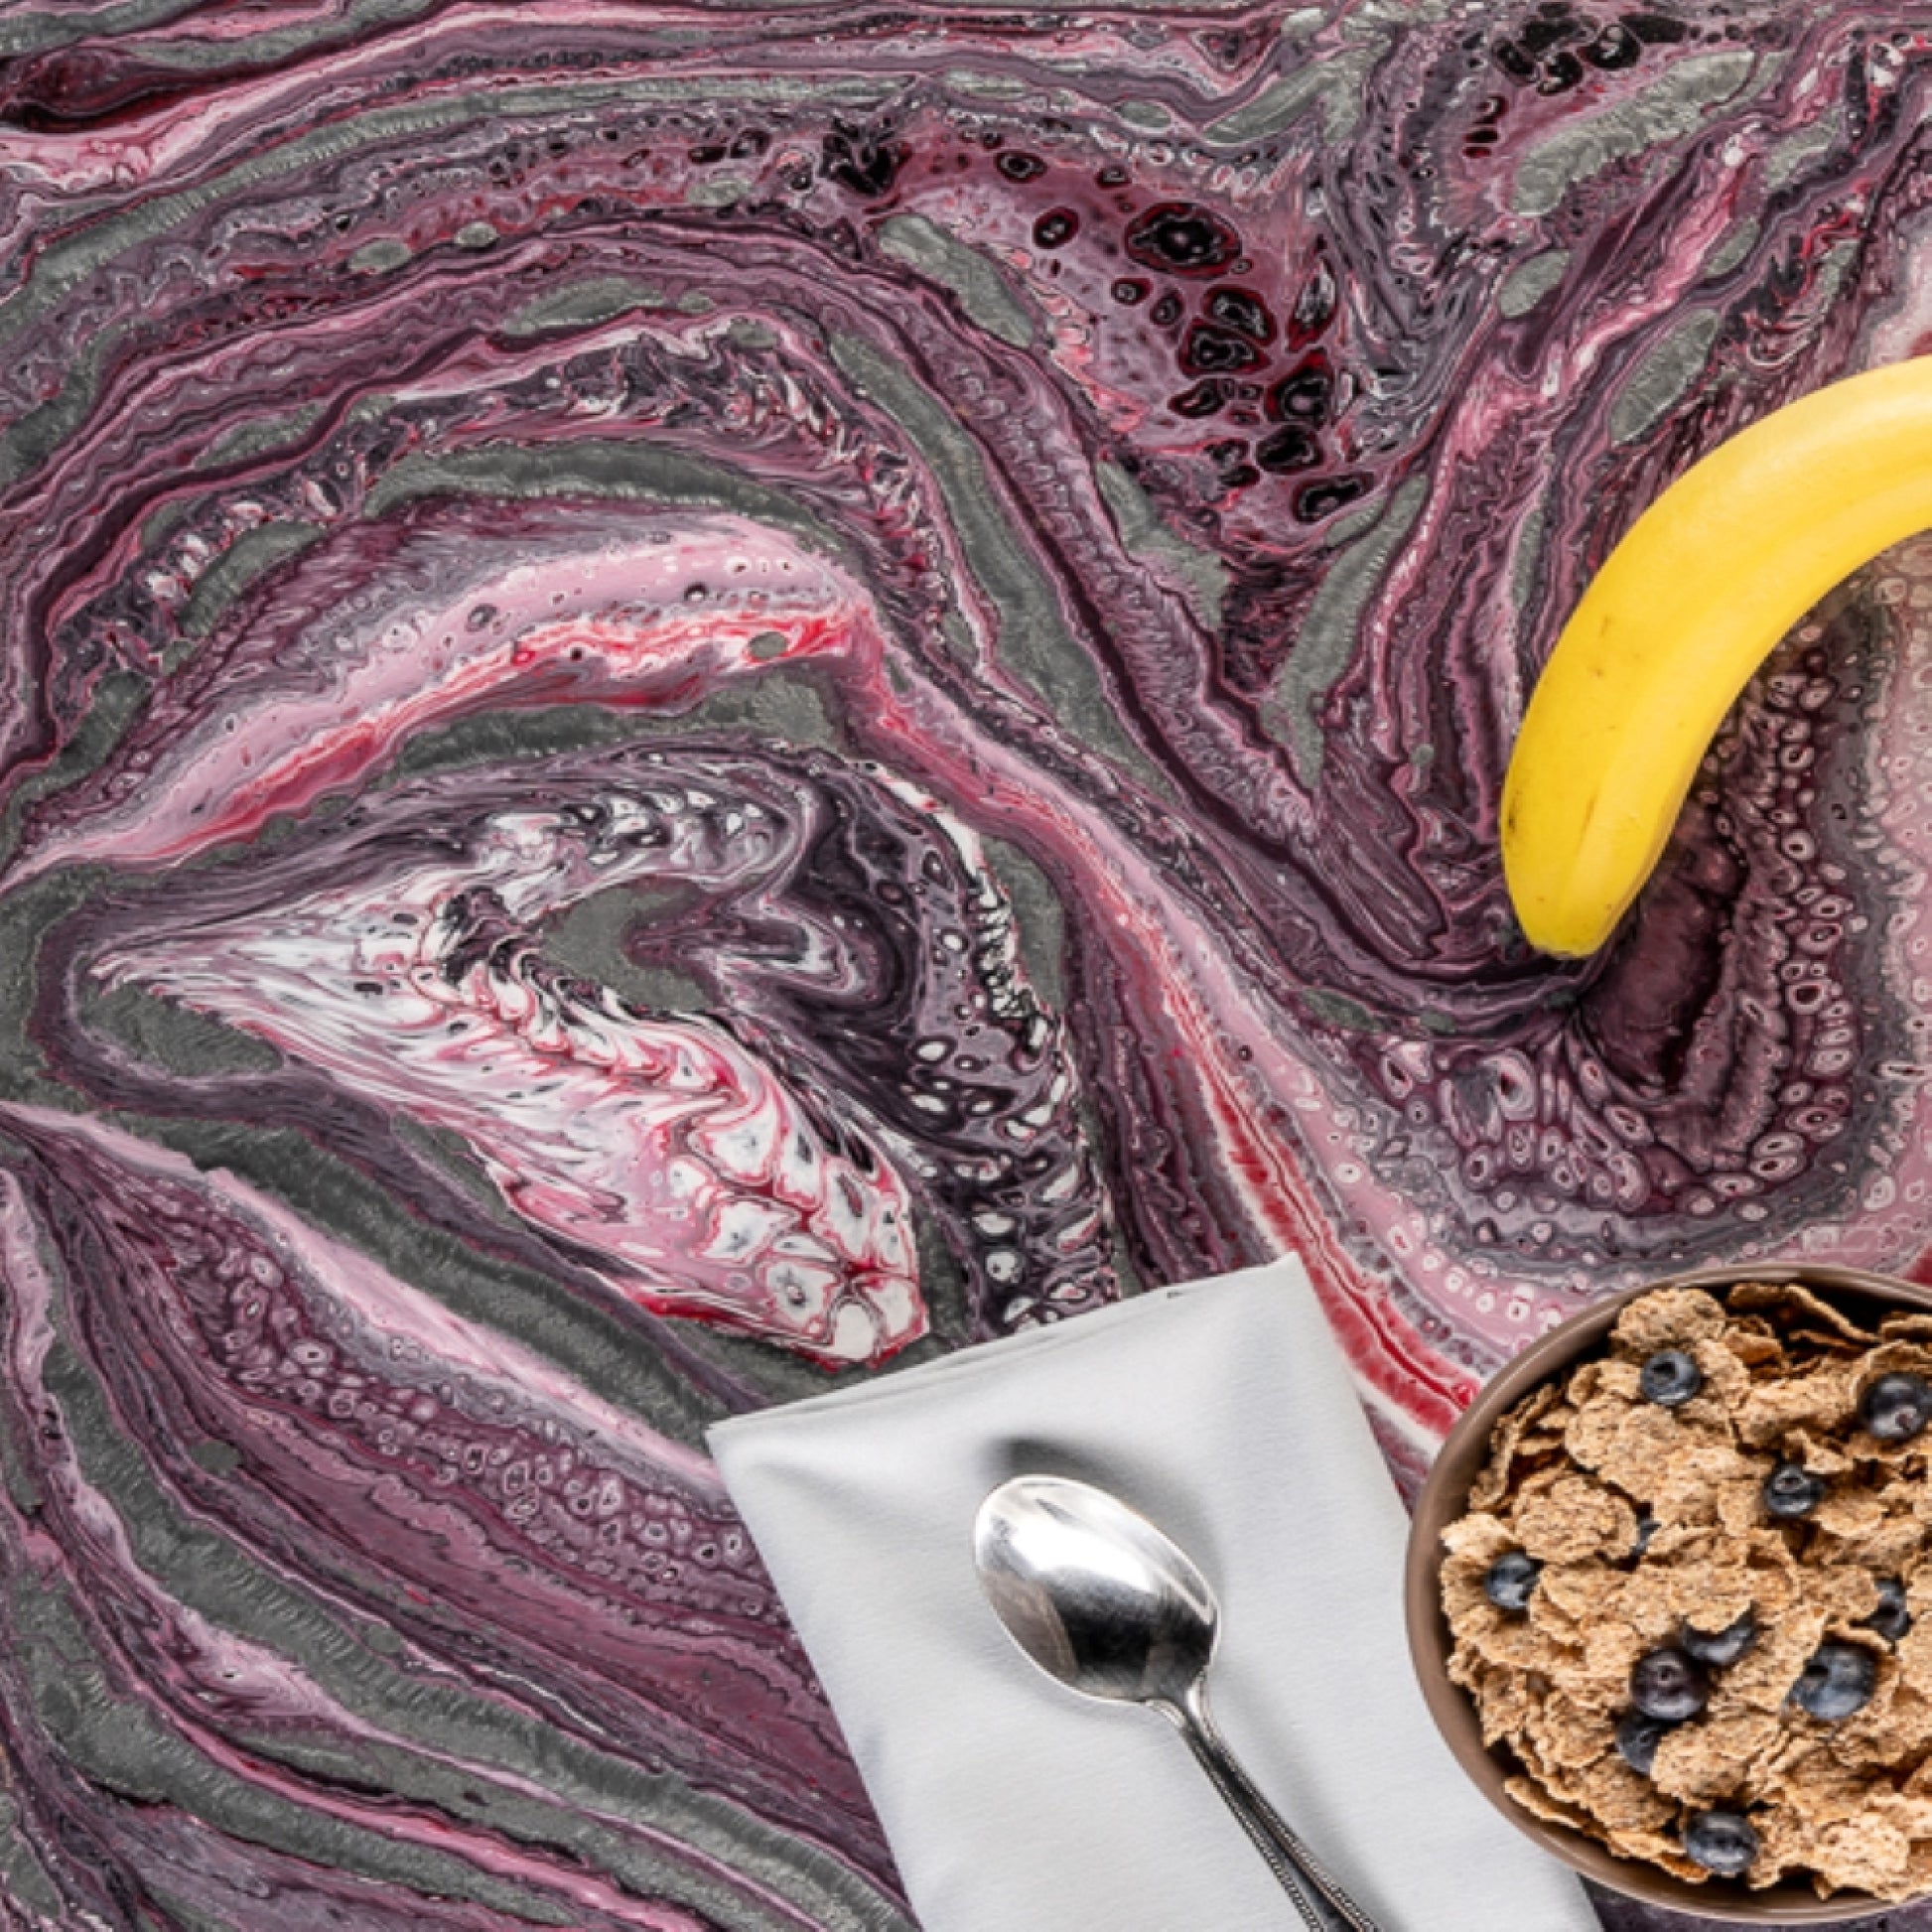 Silver Metallic Veins, White, Black, and Magenta Resin: One-of-a-Kind Surface